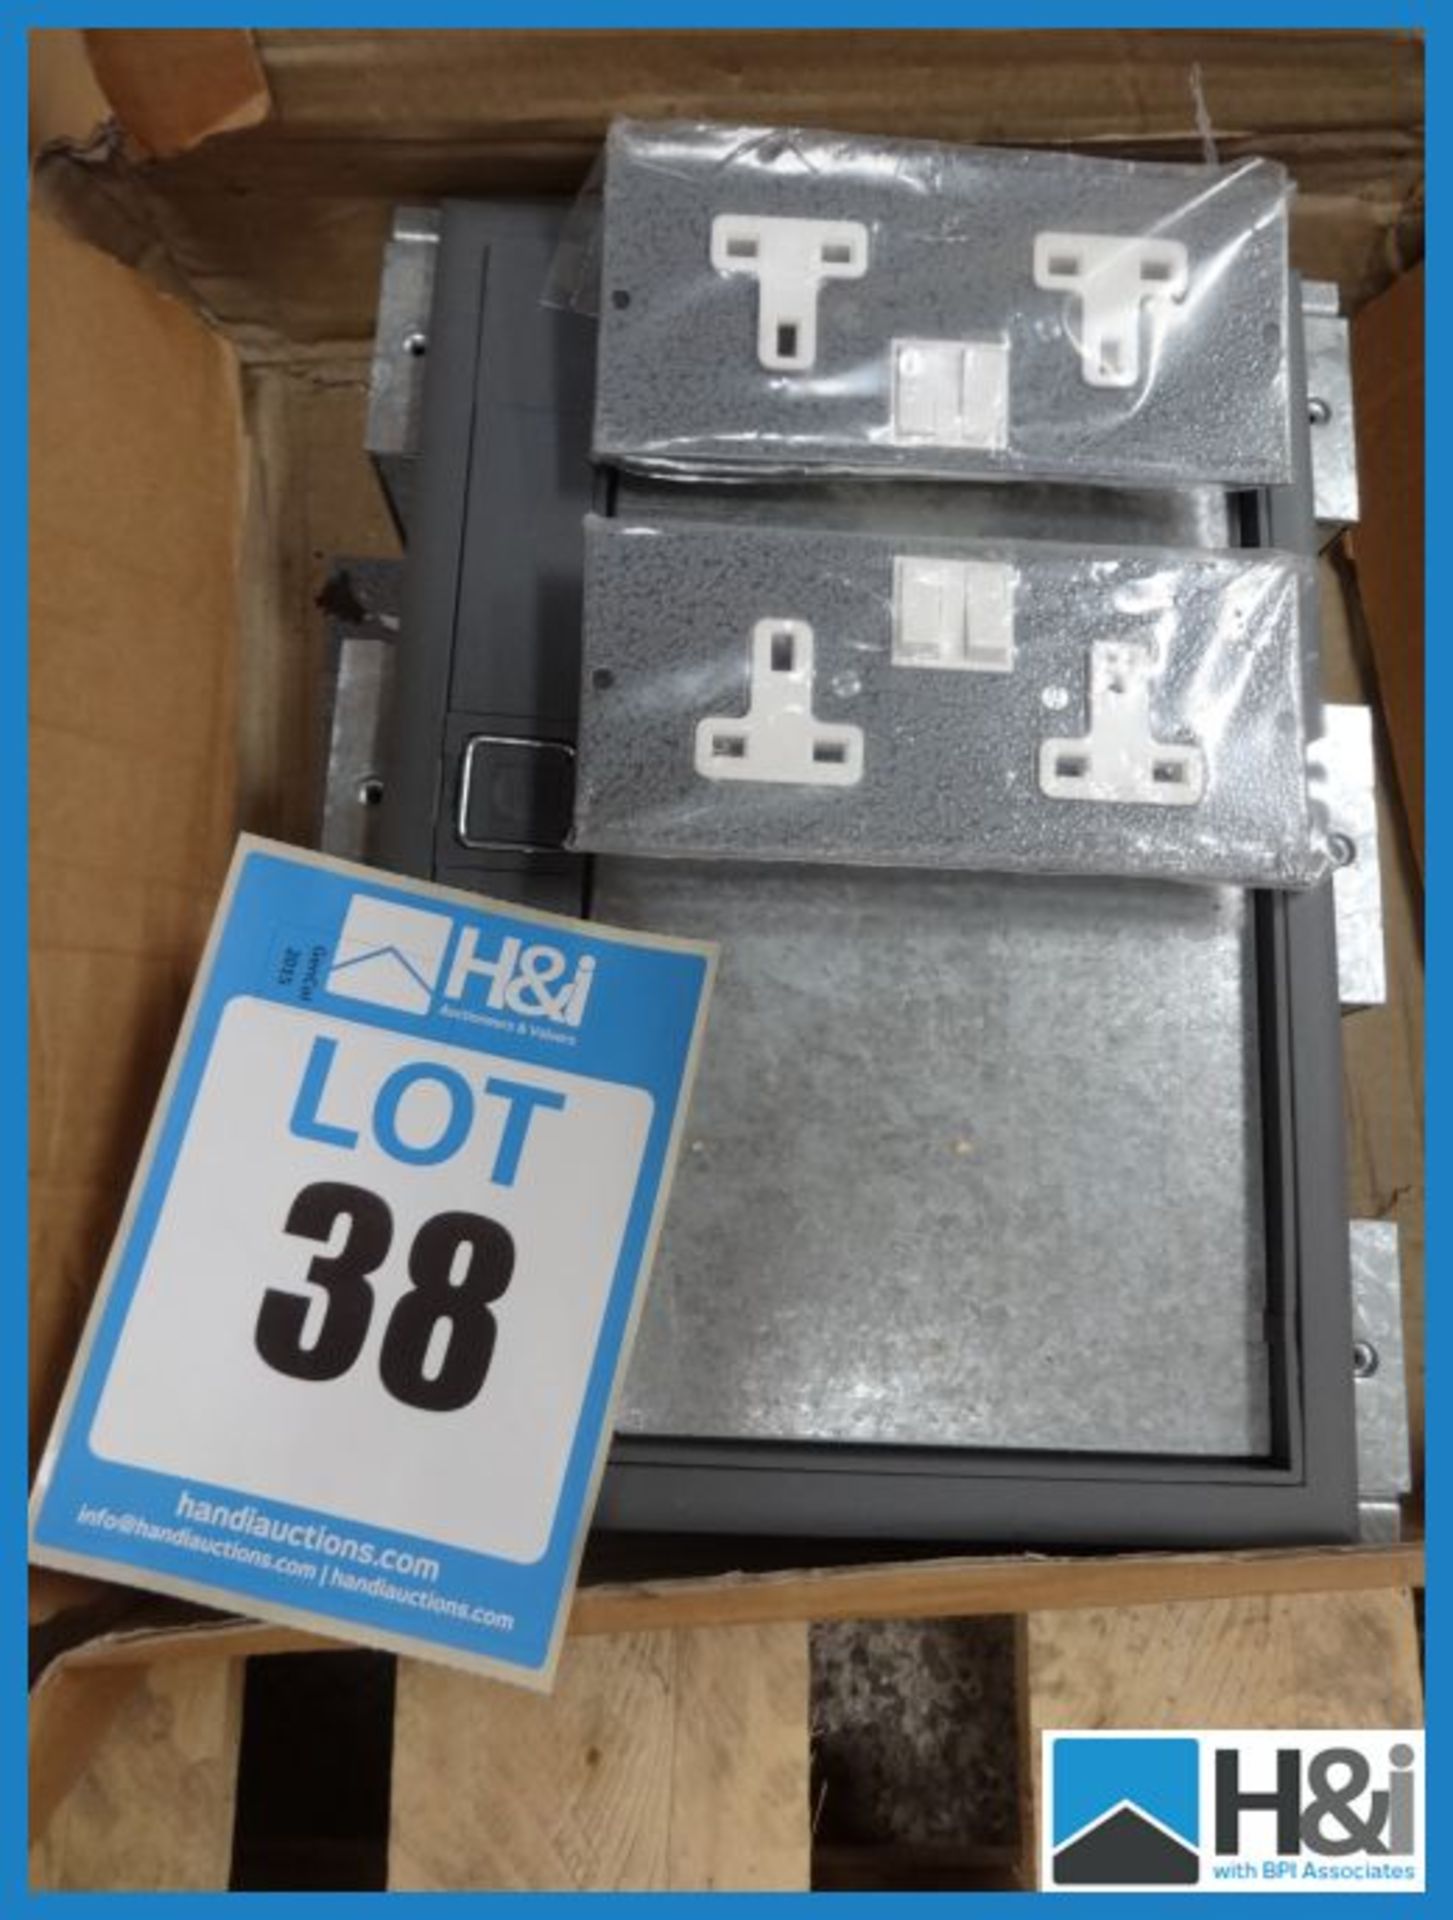 New Electric Socket Floor Plate with Sockets Appraisal: Good Serial No: NA Location: H&I Ltd., The